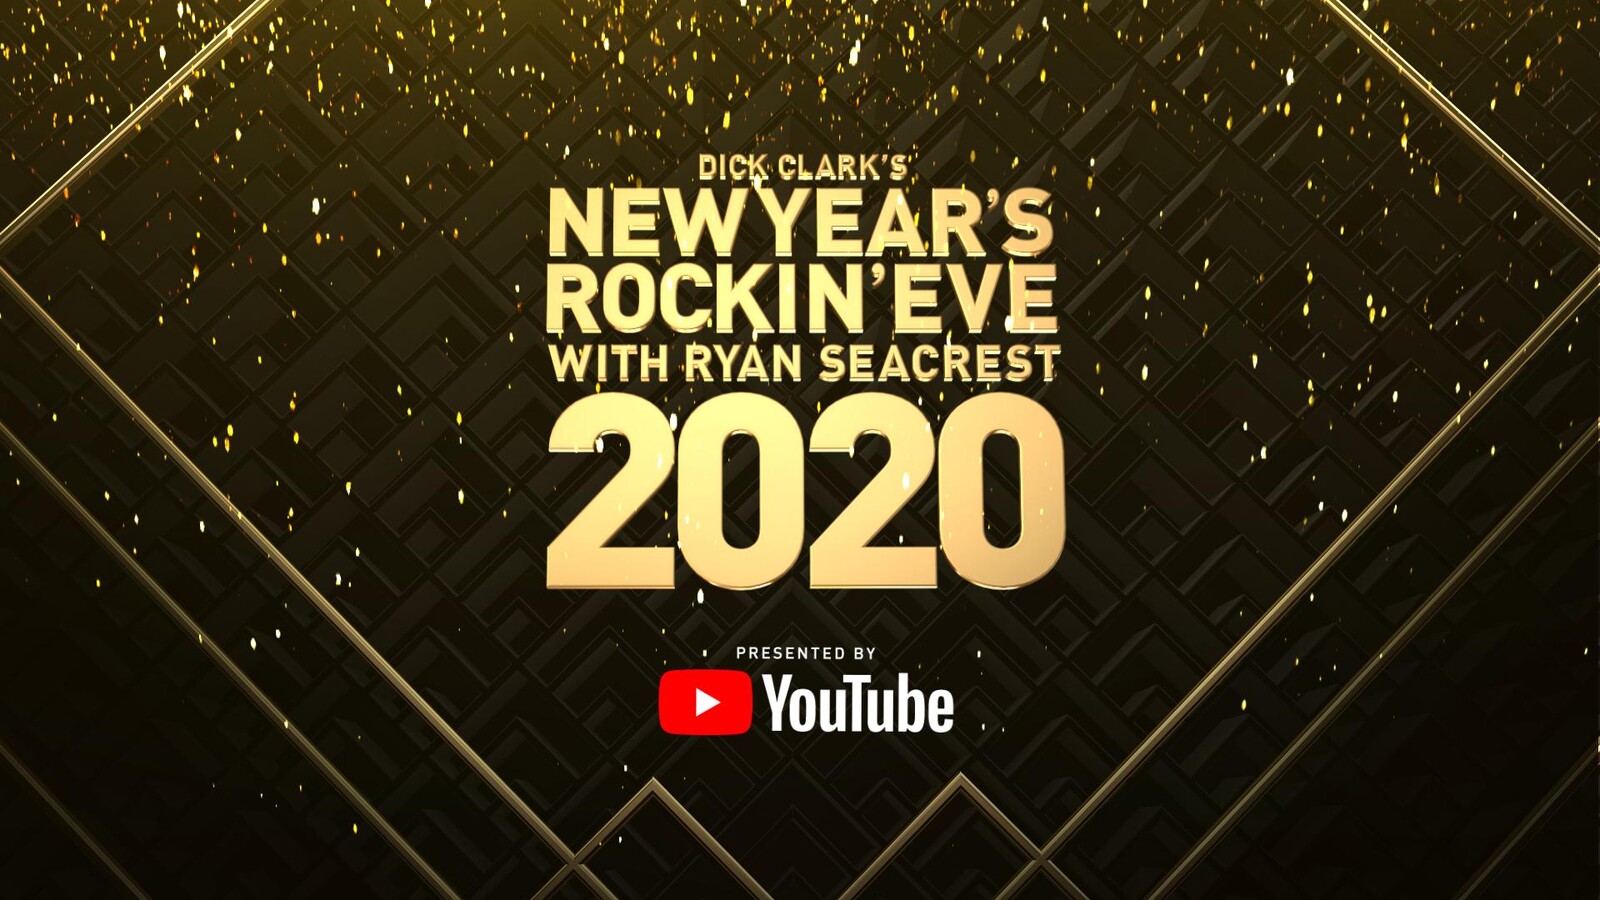 Image result for dick clark's new year's rockin' eve with ryan seacrest 2020